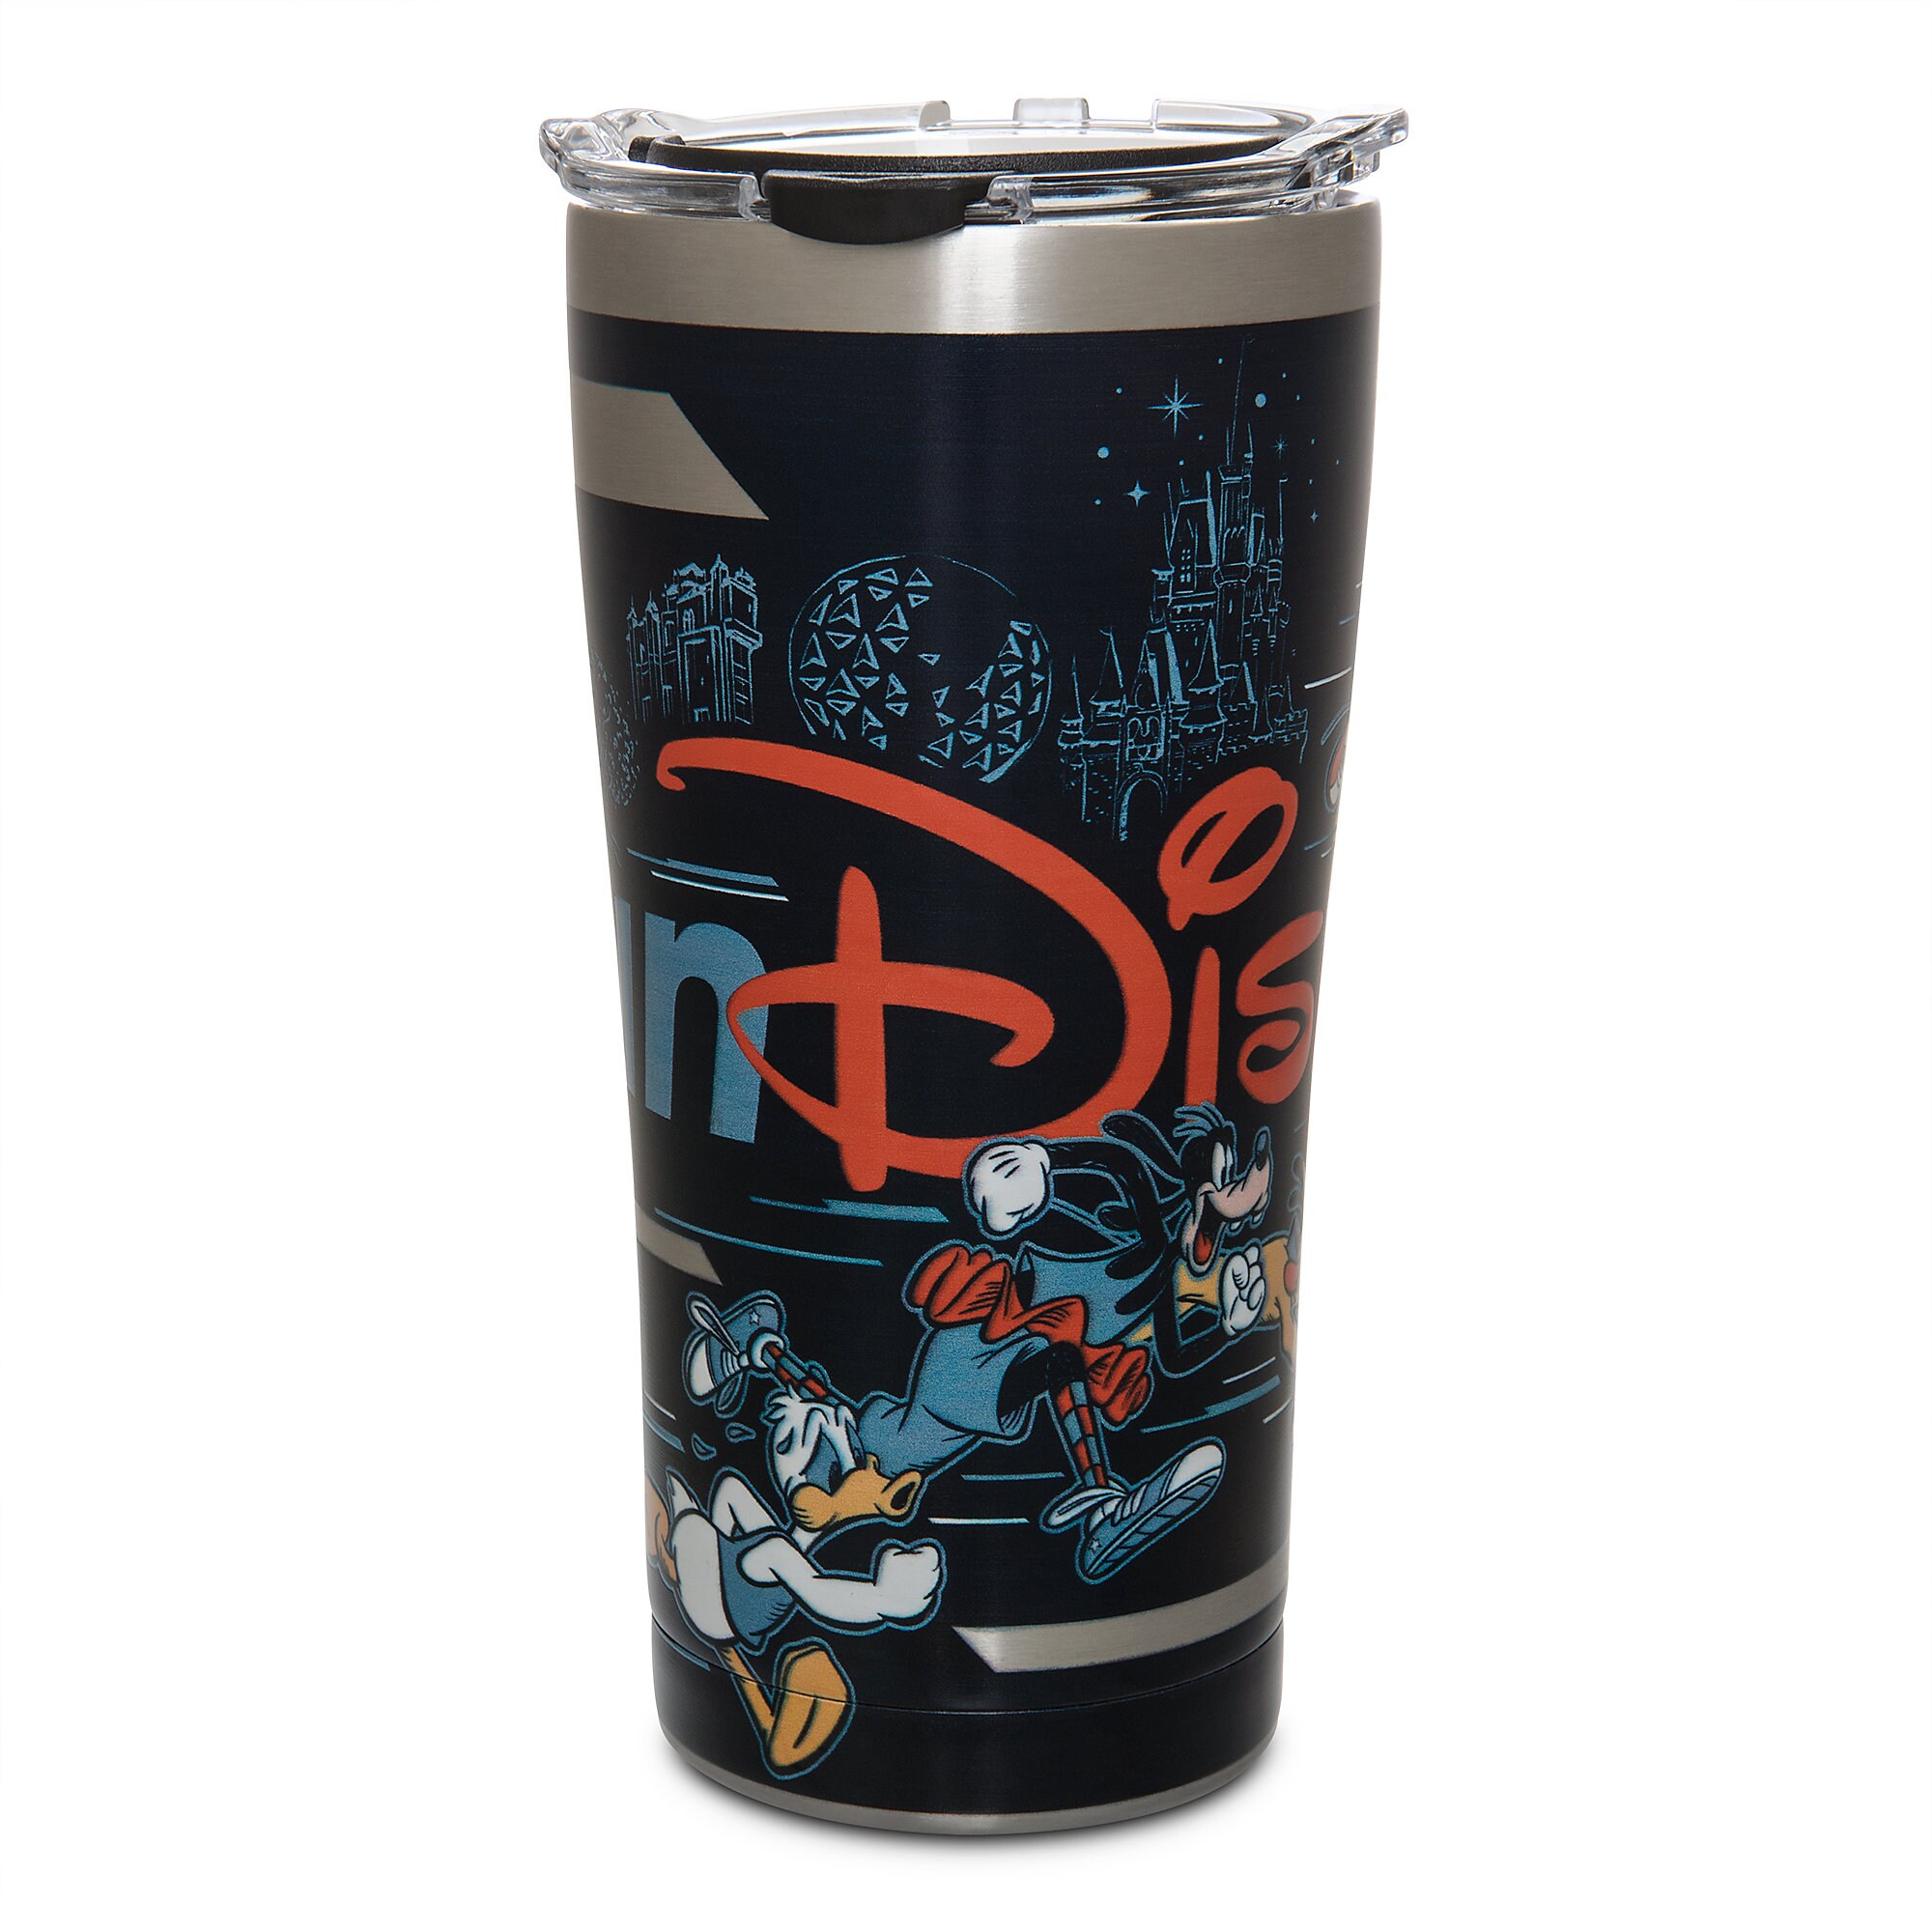 Mickey Mouse and Friends runDisney Stainless Steel Tumbler by Tervis - 2019